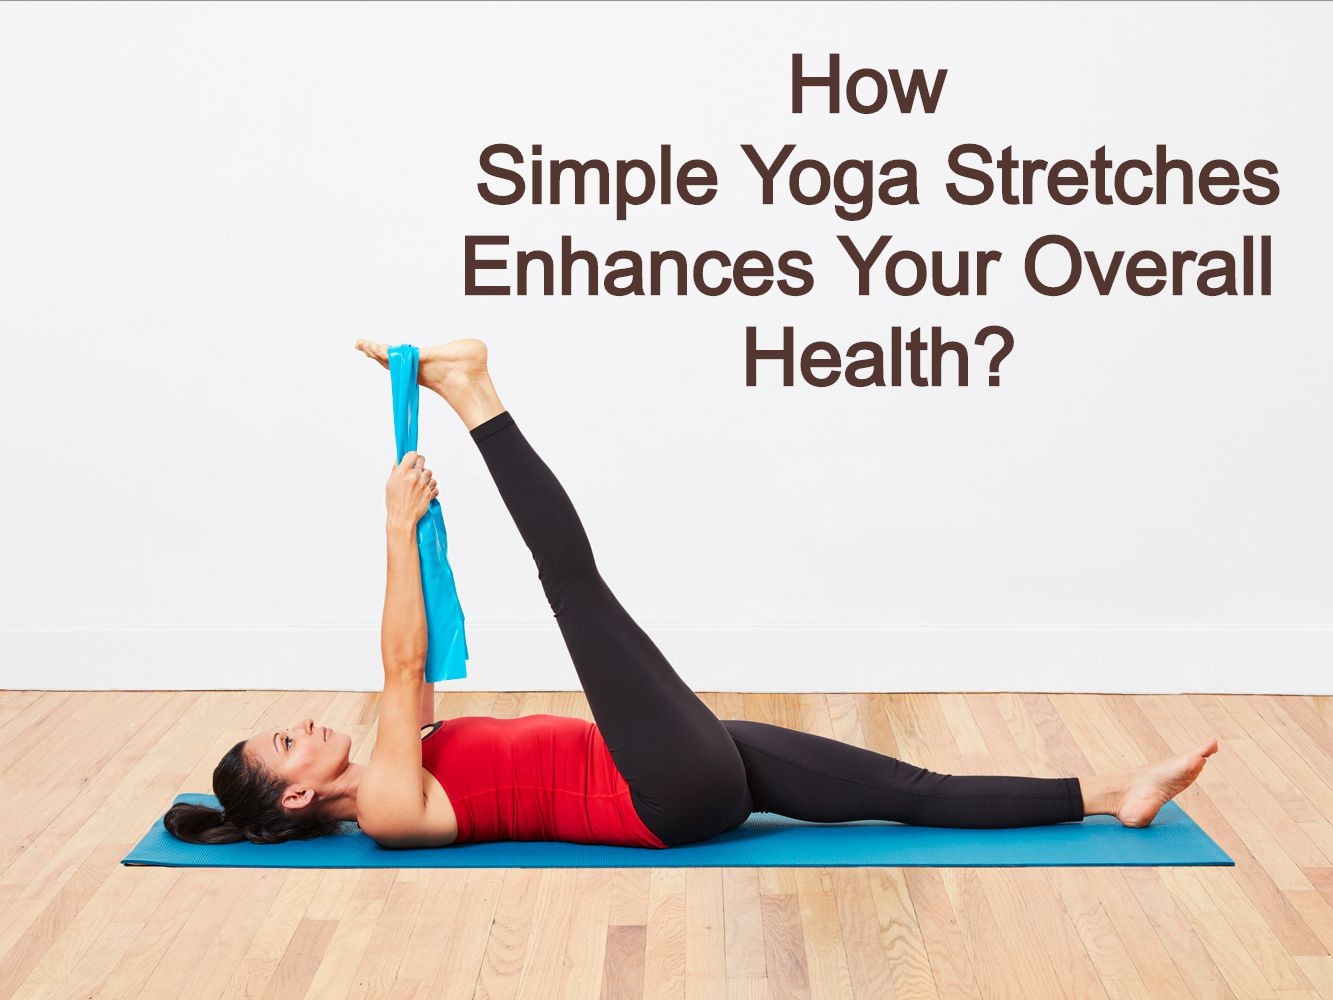 How Simple Yoga Stretches Enhances Your Overall Health